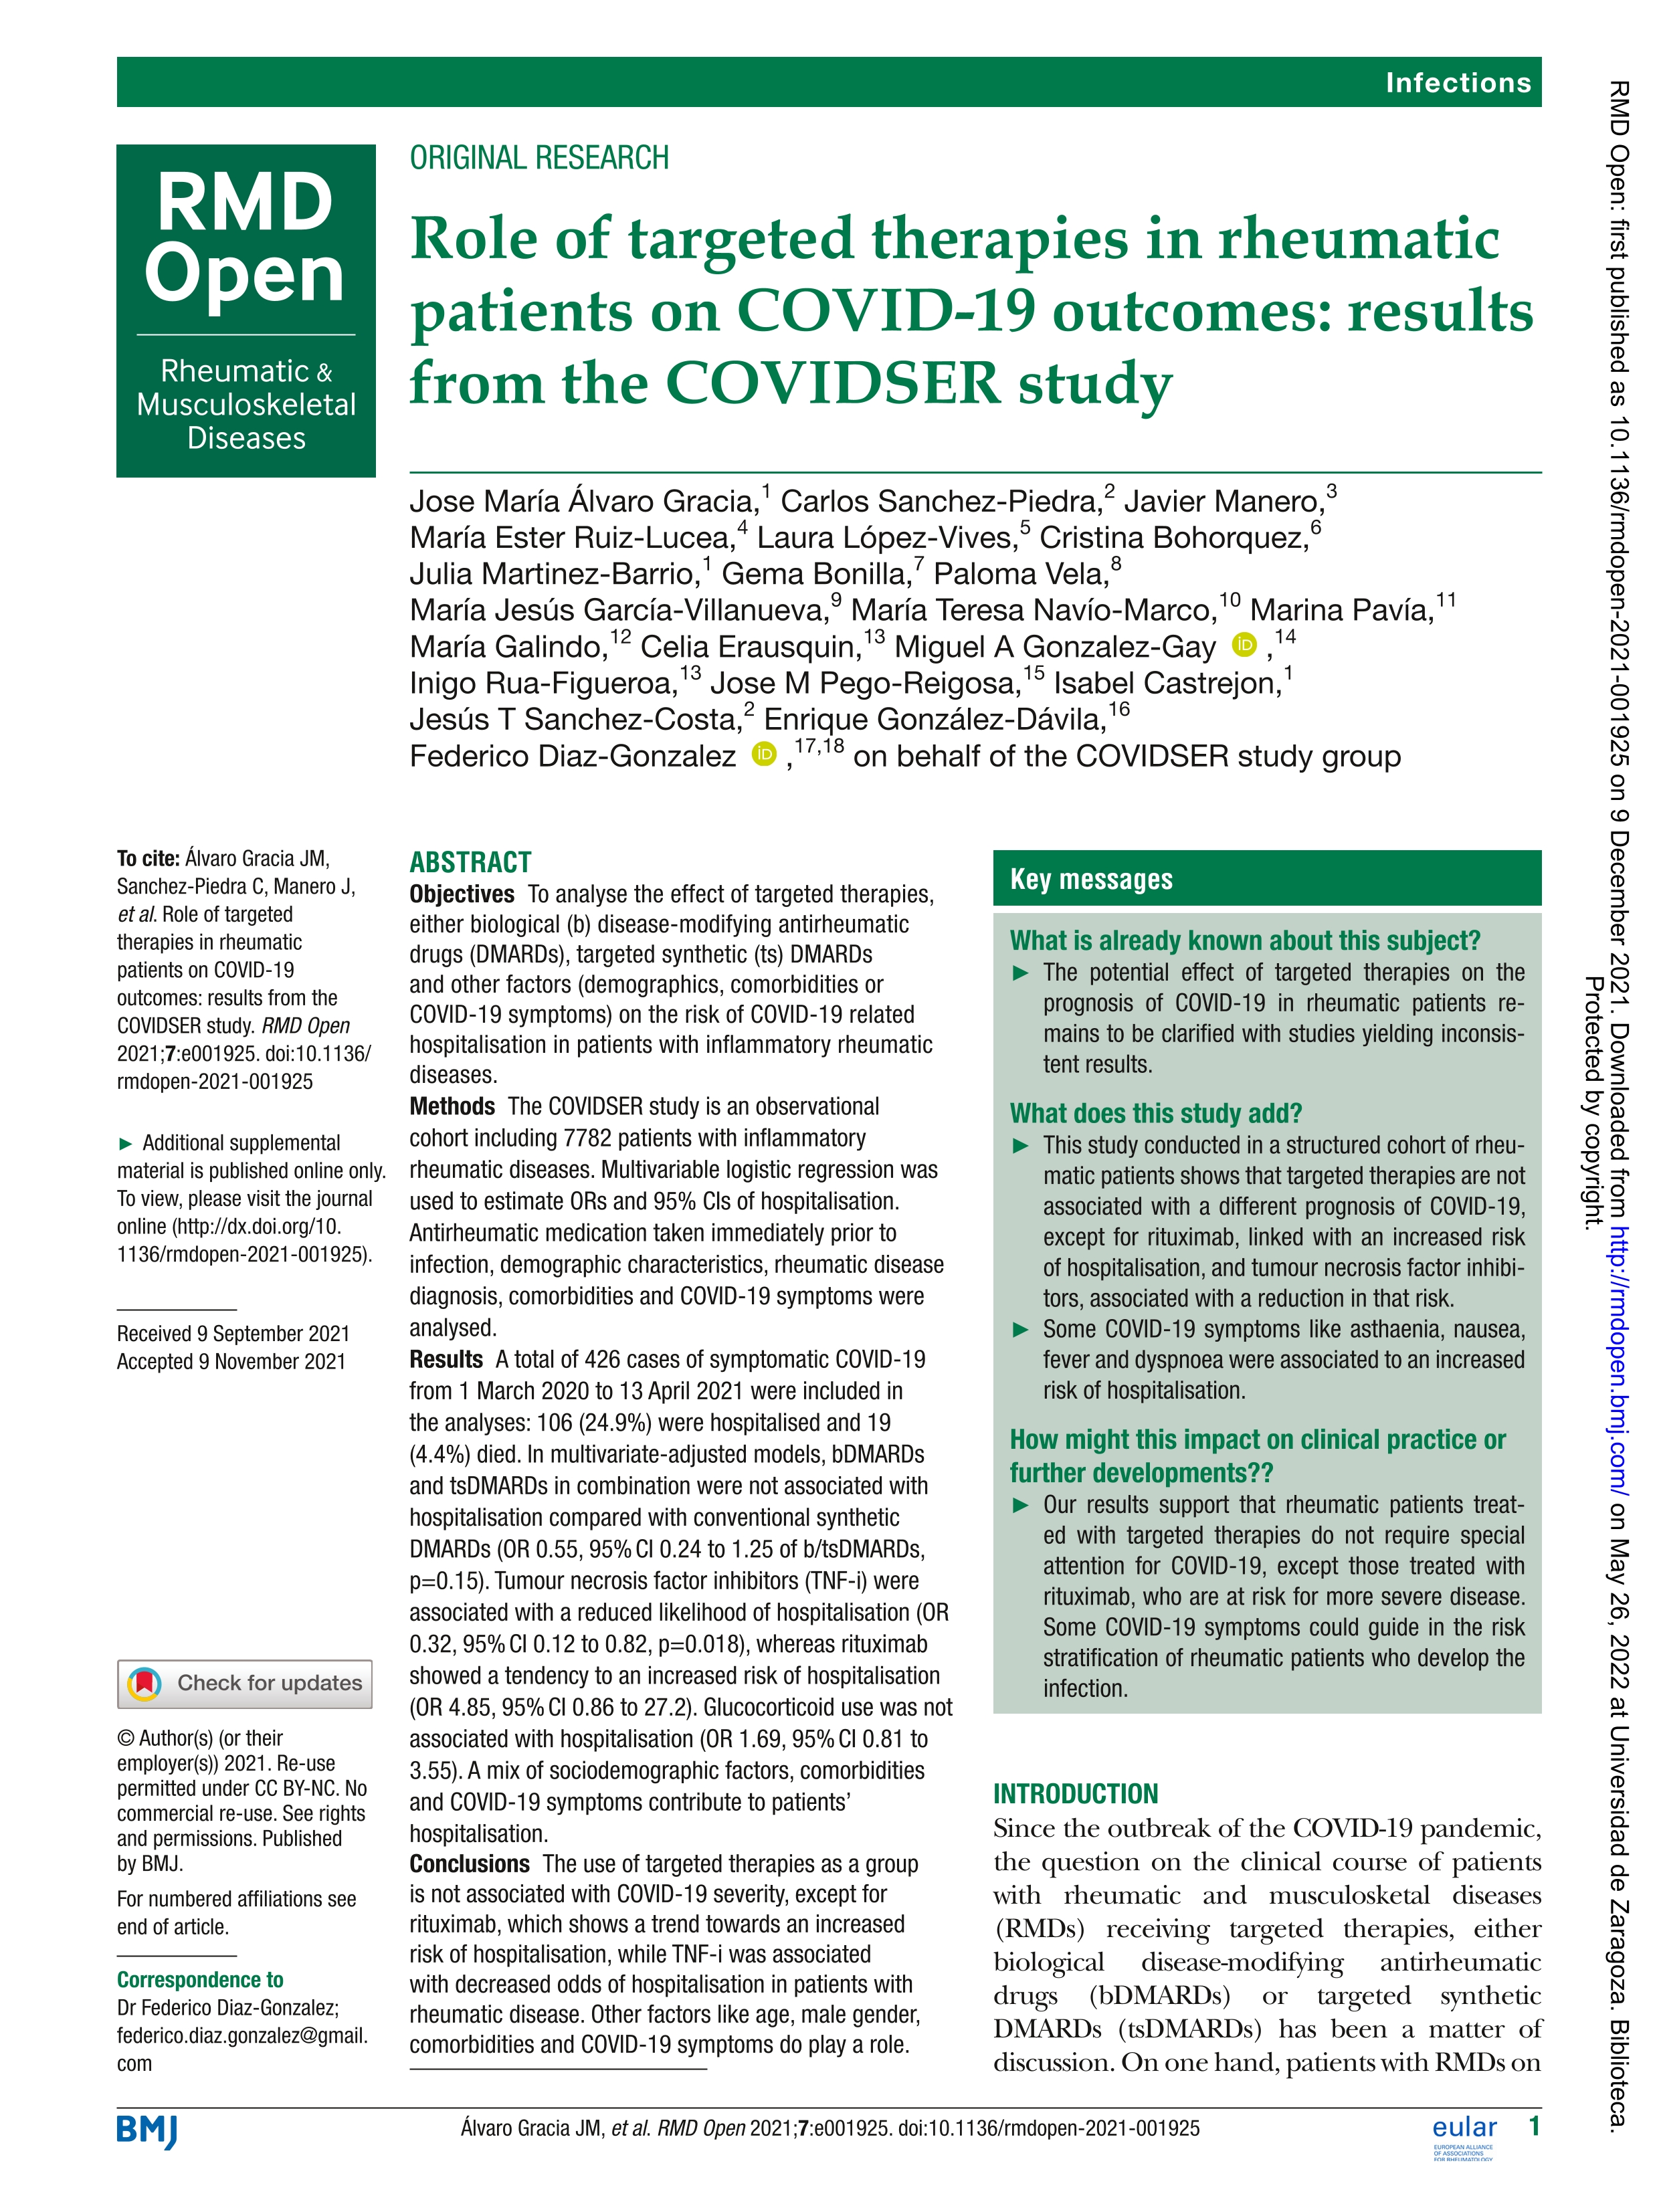 Role of targeted therapies in rheumatic patients on COVID-19 outcomes: Results from the COVIDSER study